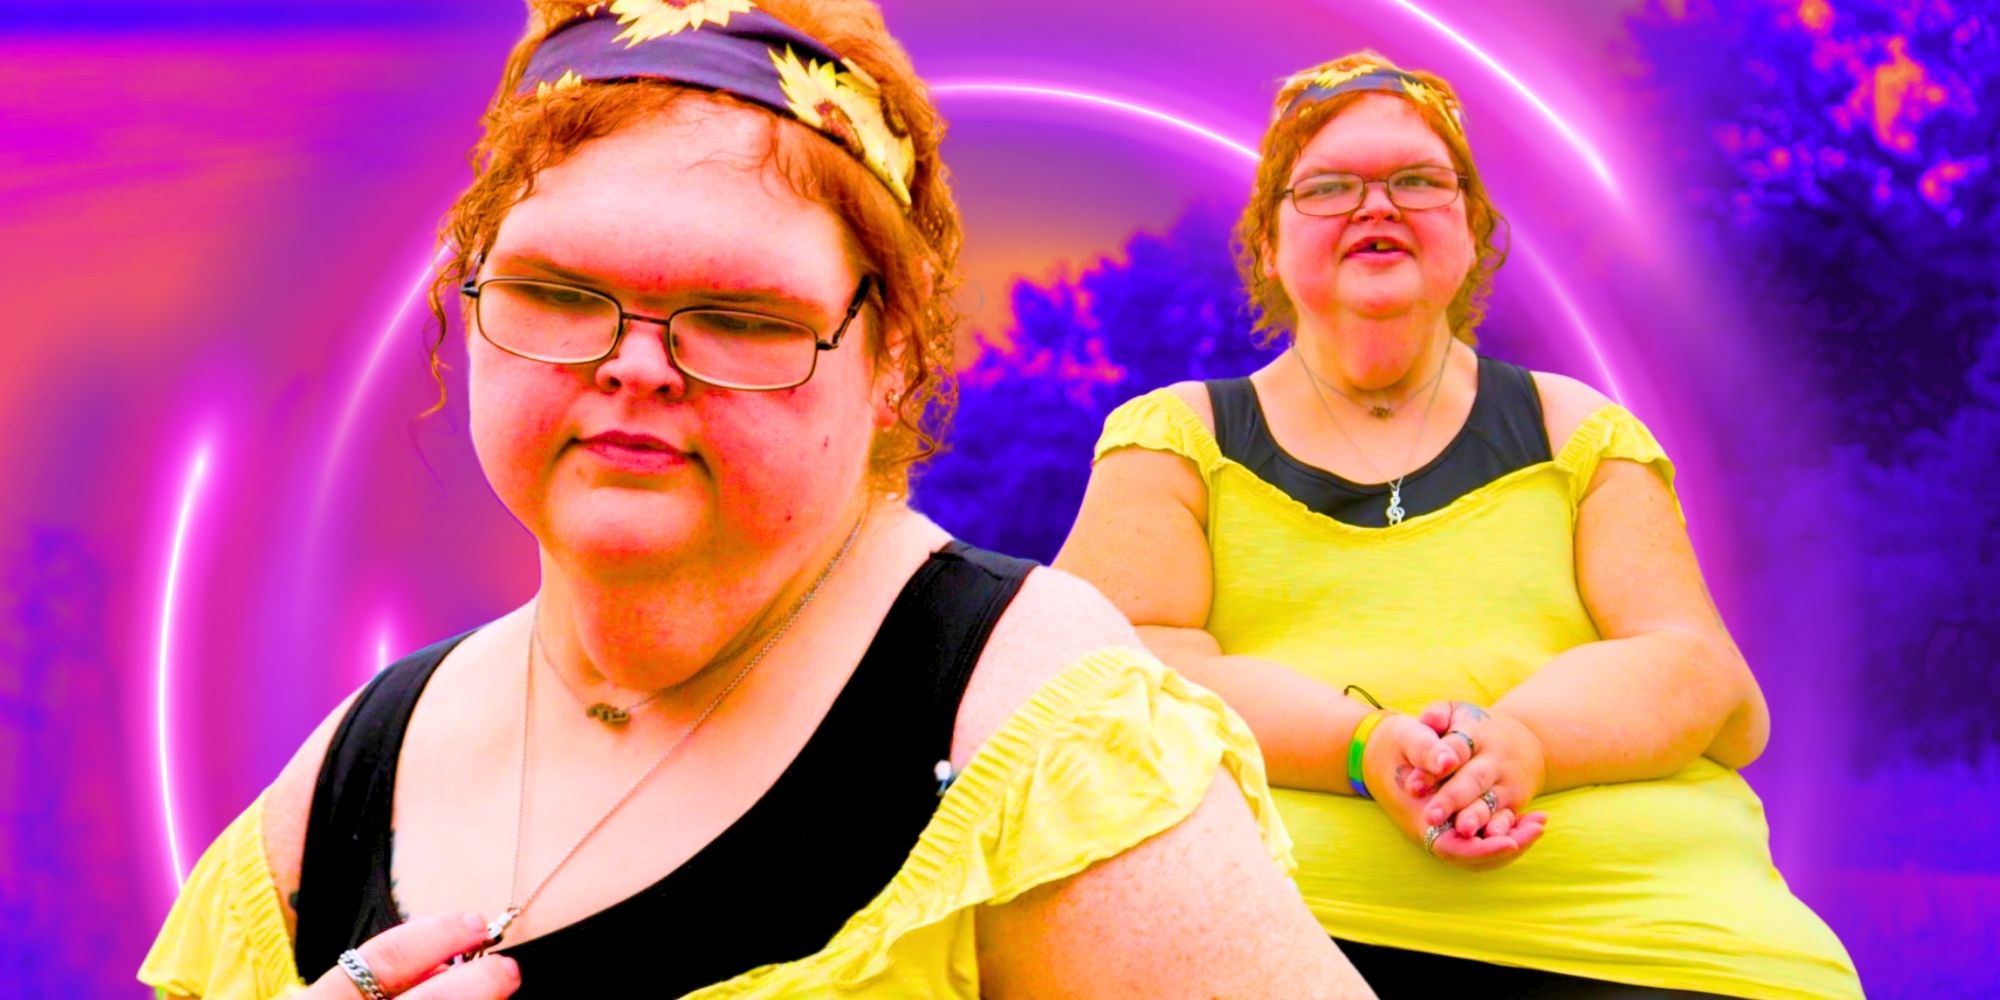 1000-lb Sisters Tammy Slaton in side by side pictures after weight loss yellow shirt purple background